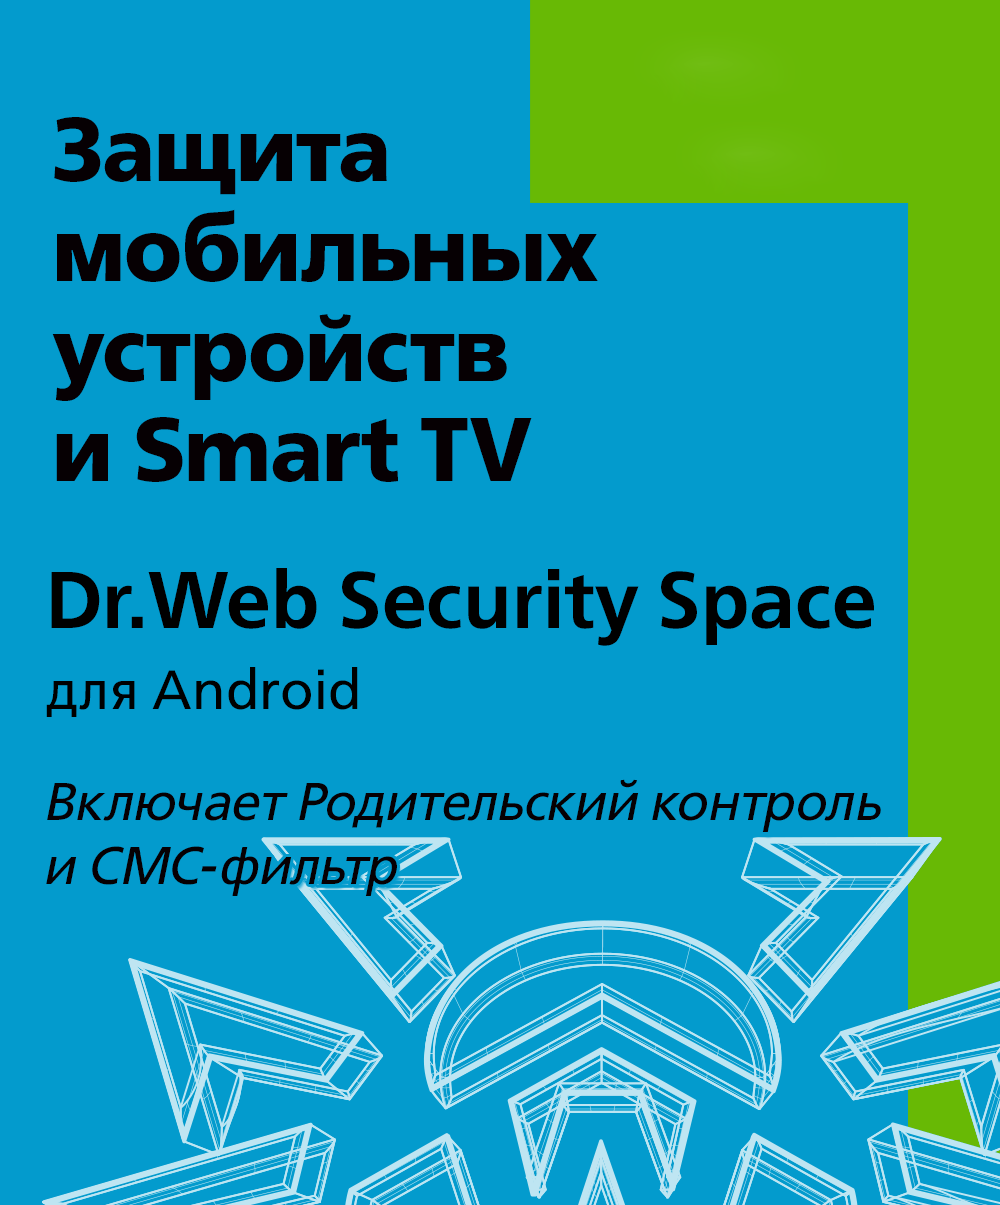 Dr. Web Mobile Security